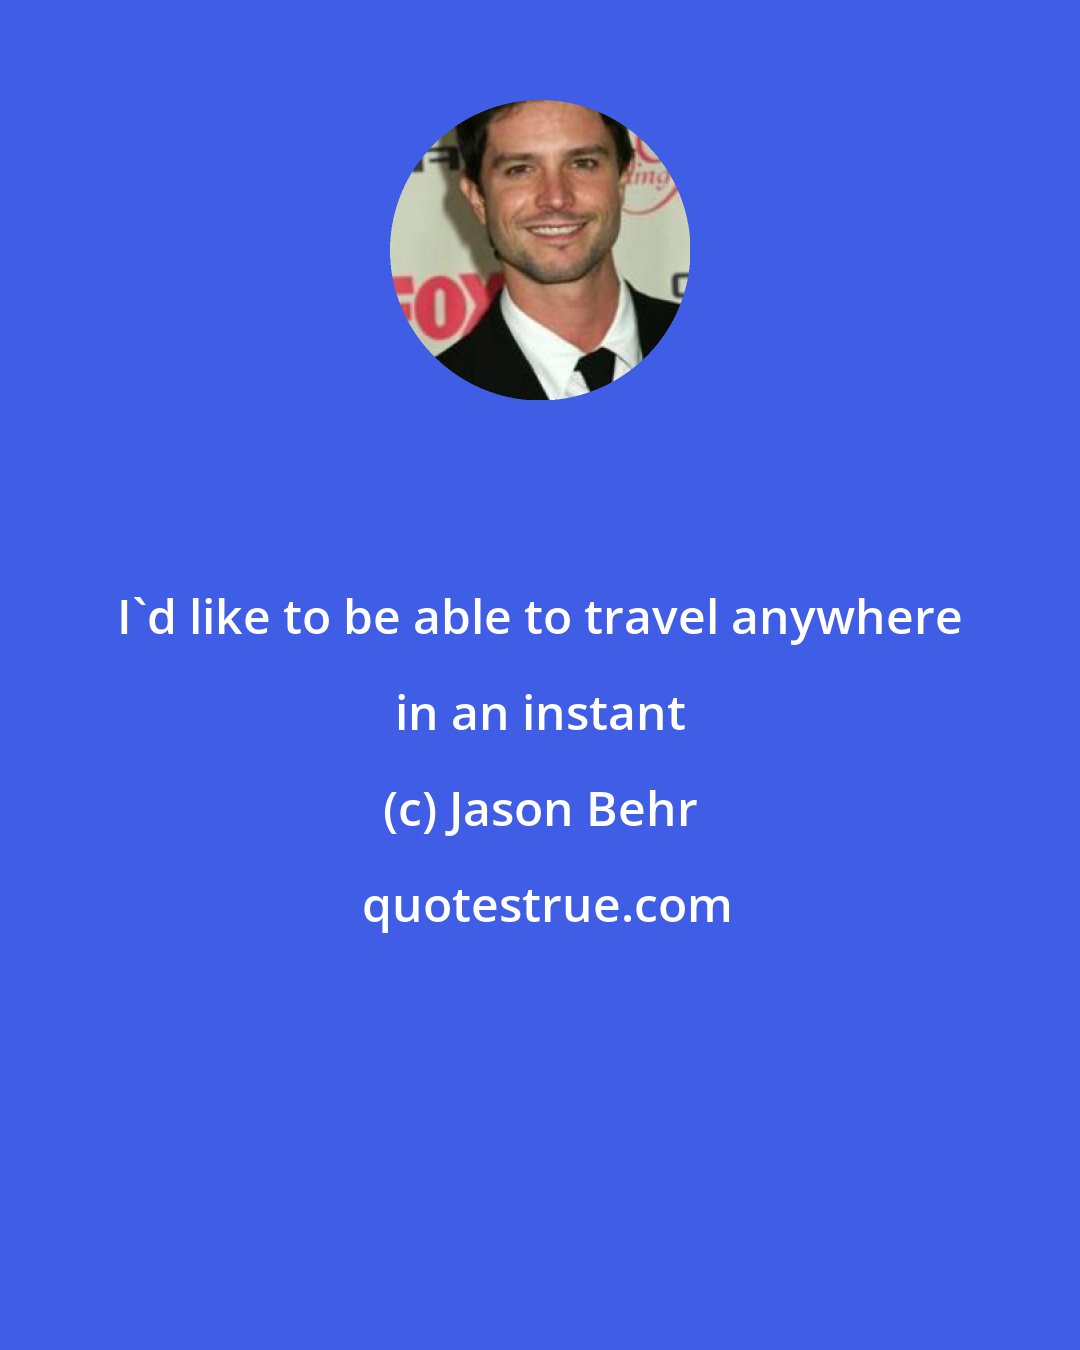 Jason Behr: I'd like to be able to travel anywhere in an instant